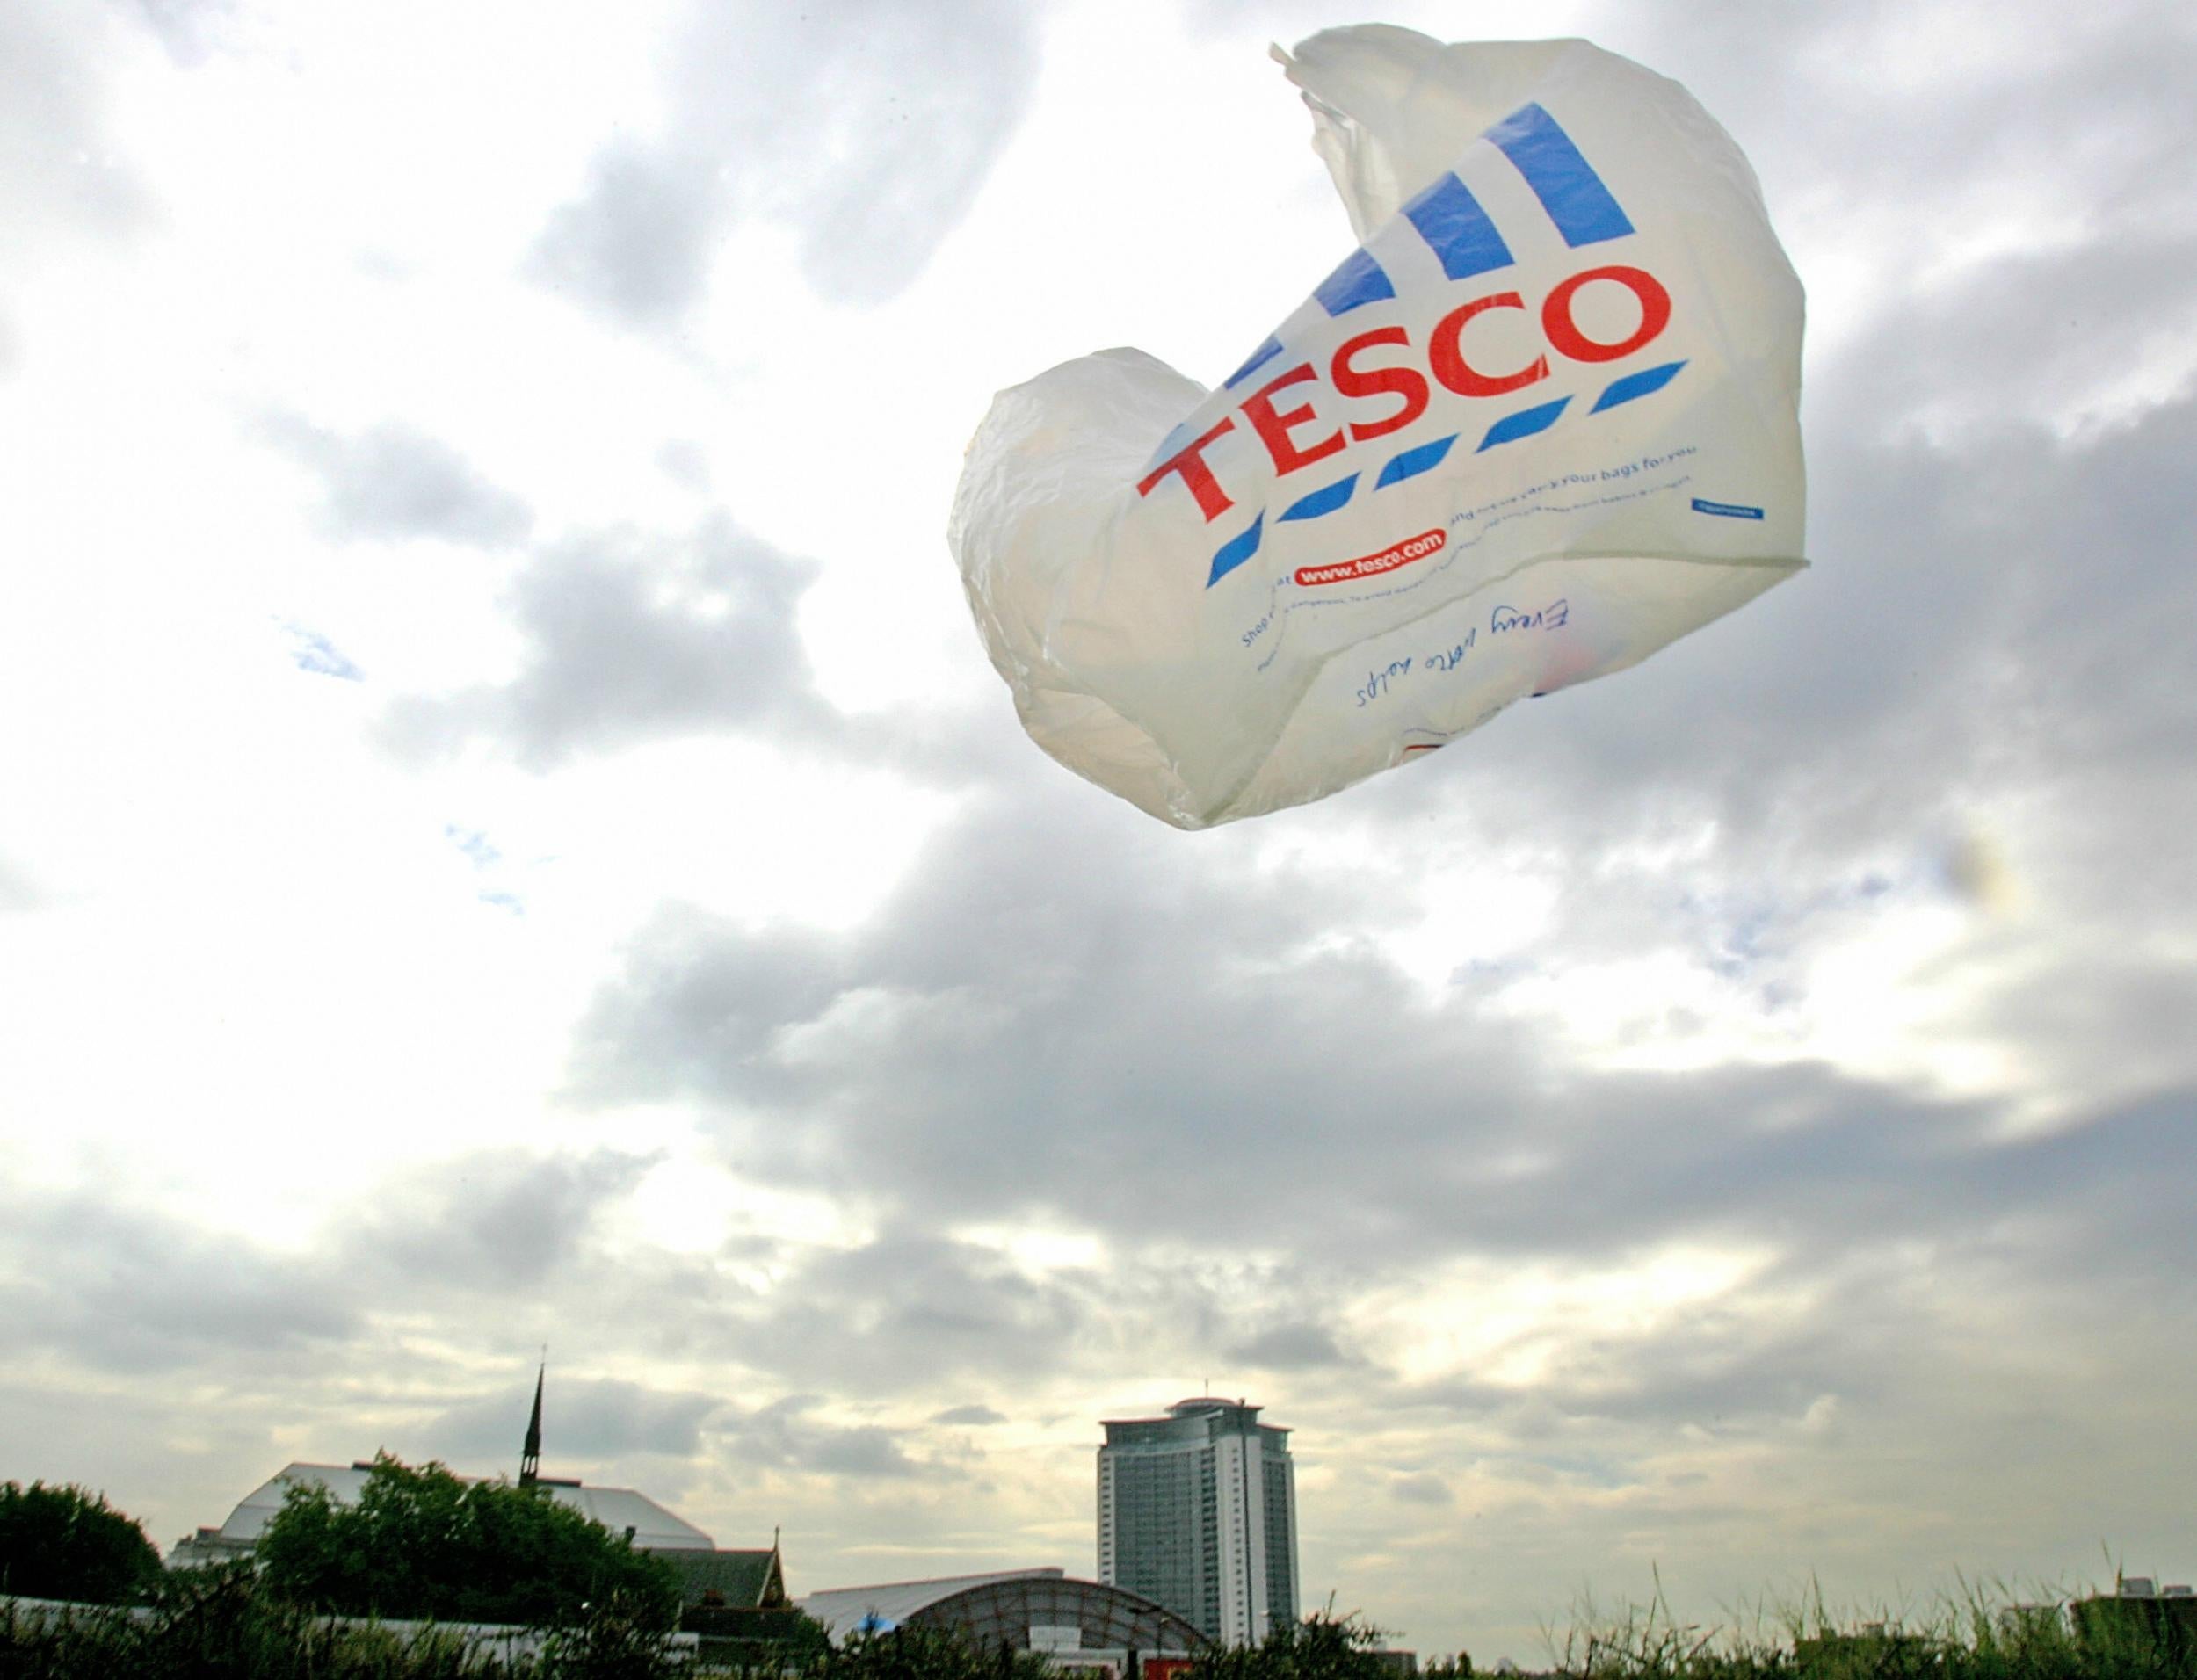 The UK’s biggest supermarket chain has still to set a firm commitment to reduce the volume of plastic it produces and sells